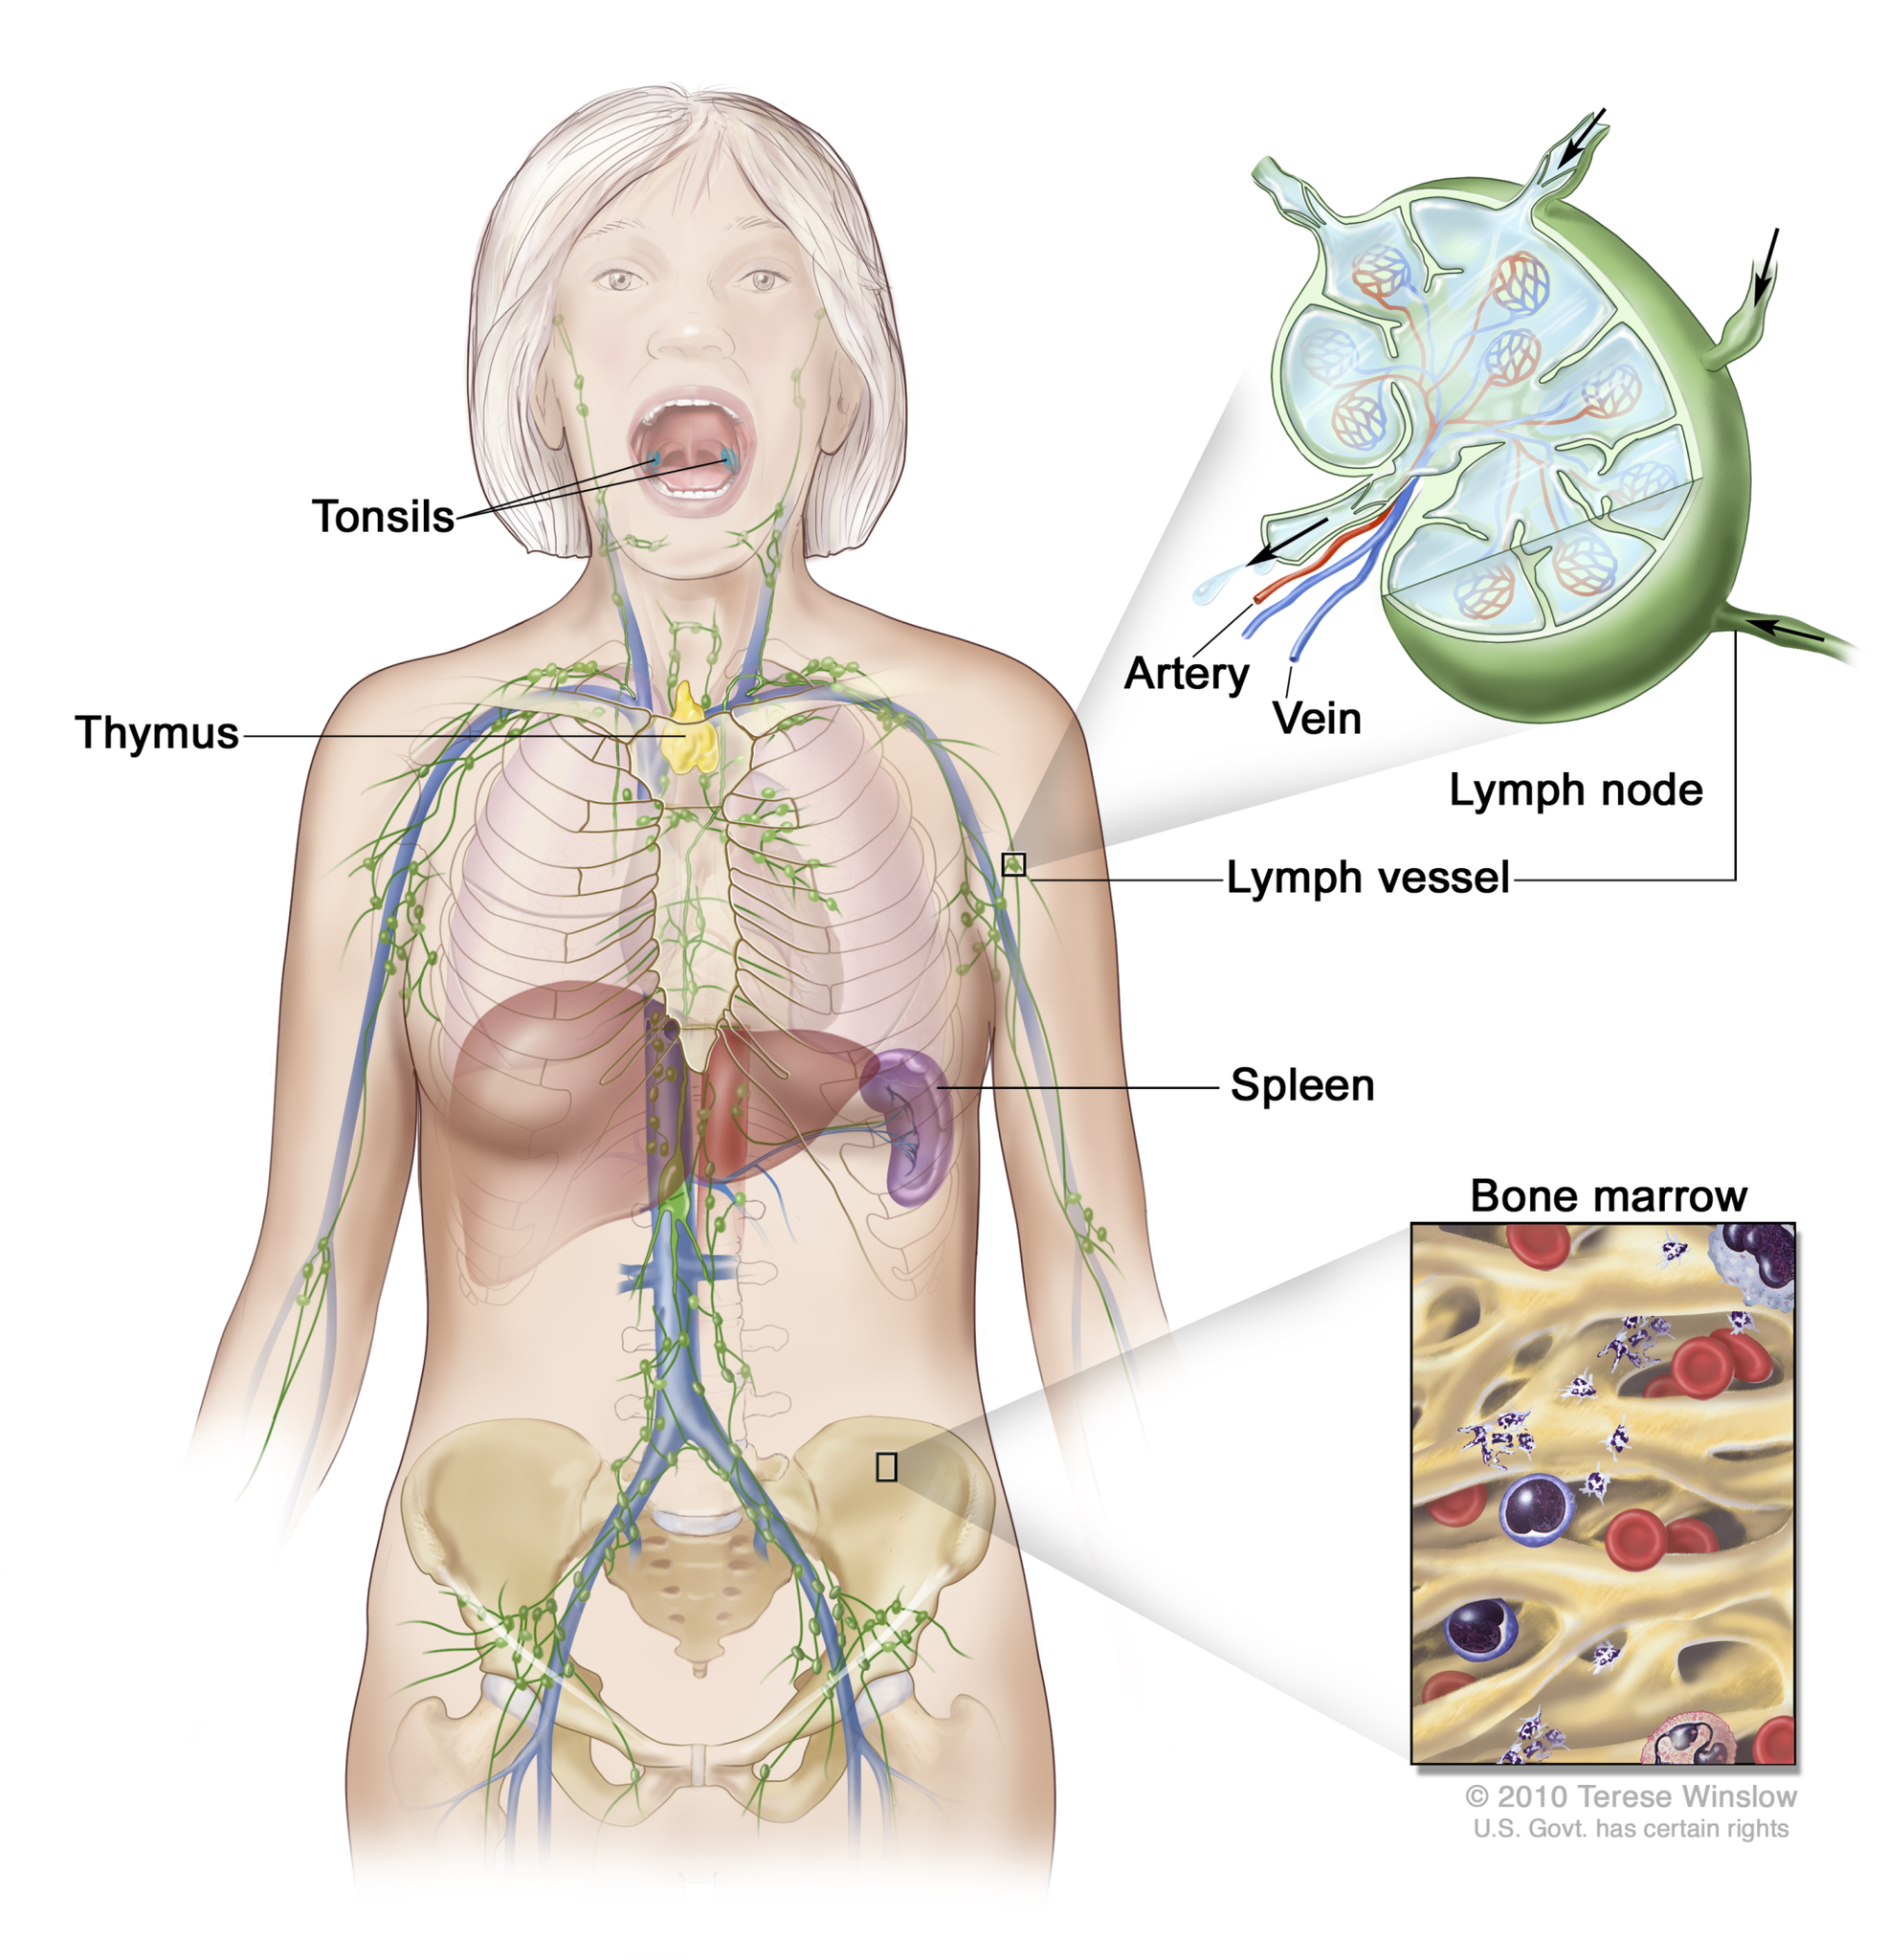 The Lymph system